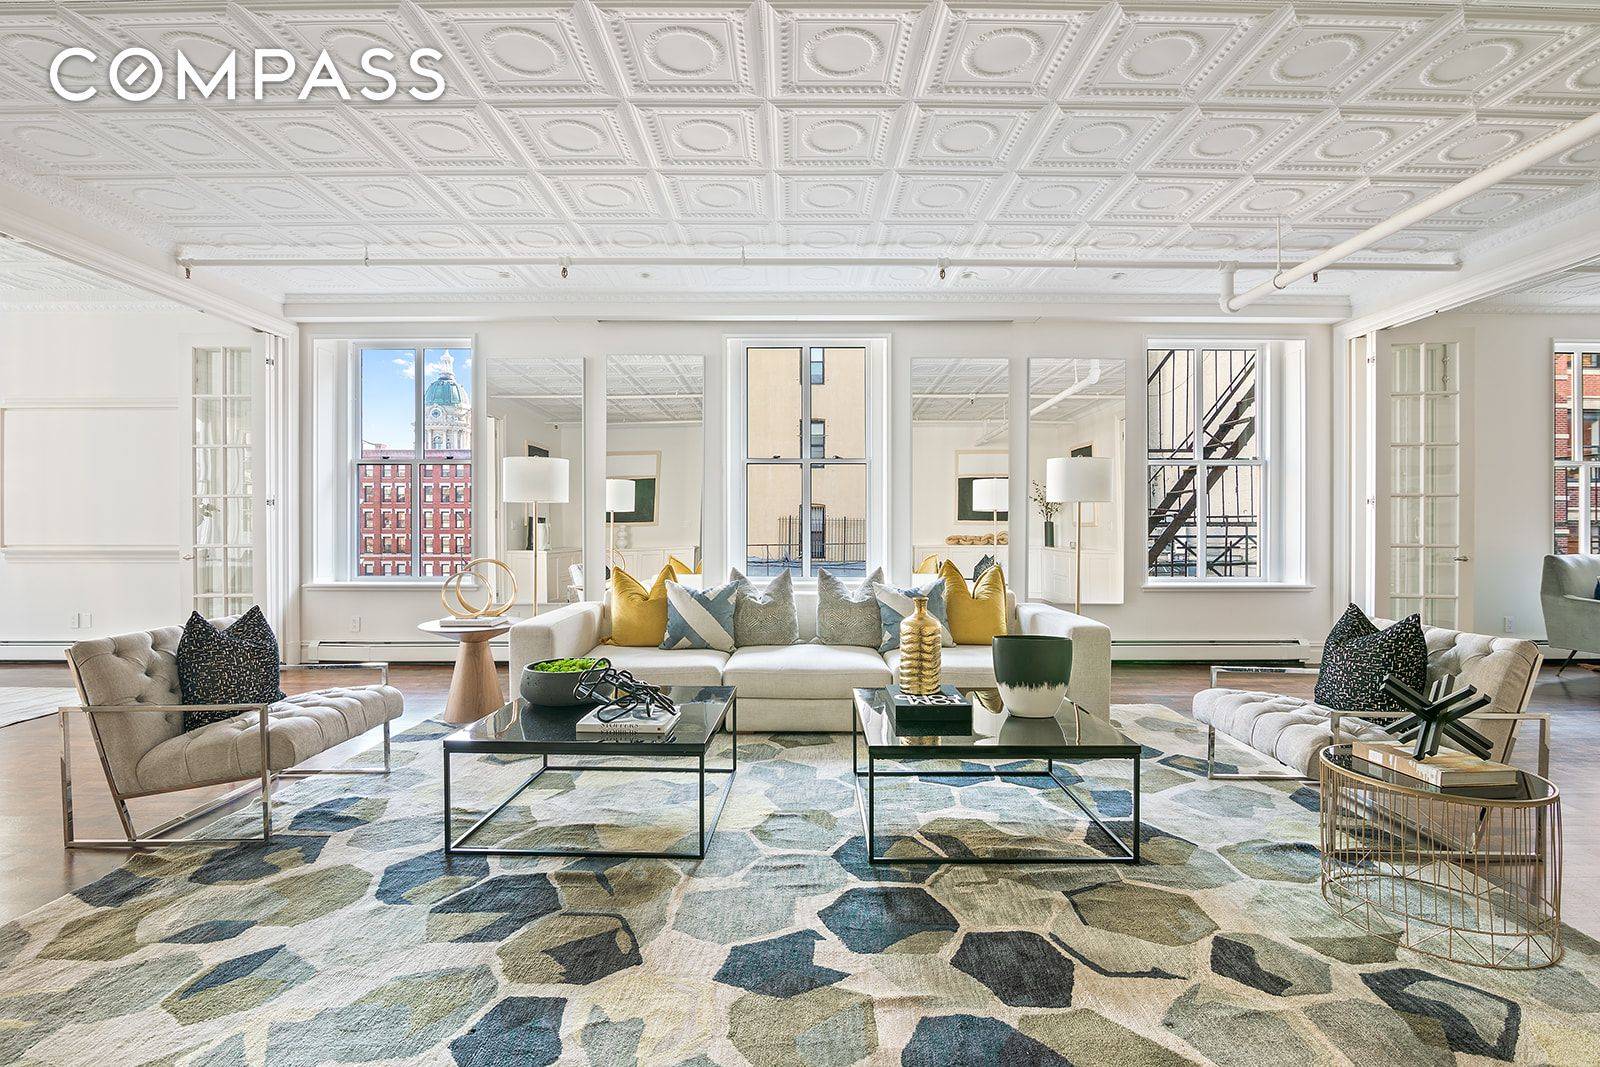 This elegant and expansive 3, 224 sq ft, 4 bedroom, 3 bathroom SoHo corner loft is flooded with natural light through 17 incredibly large windows.